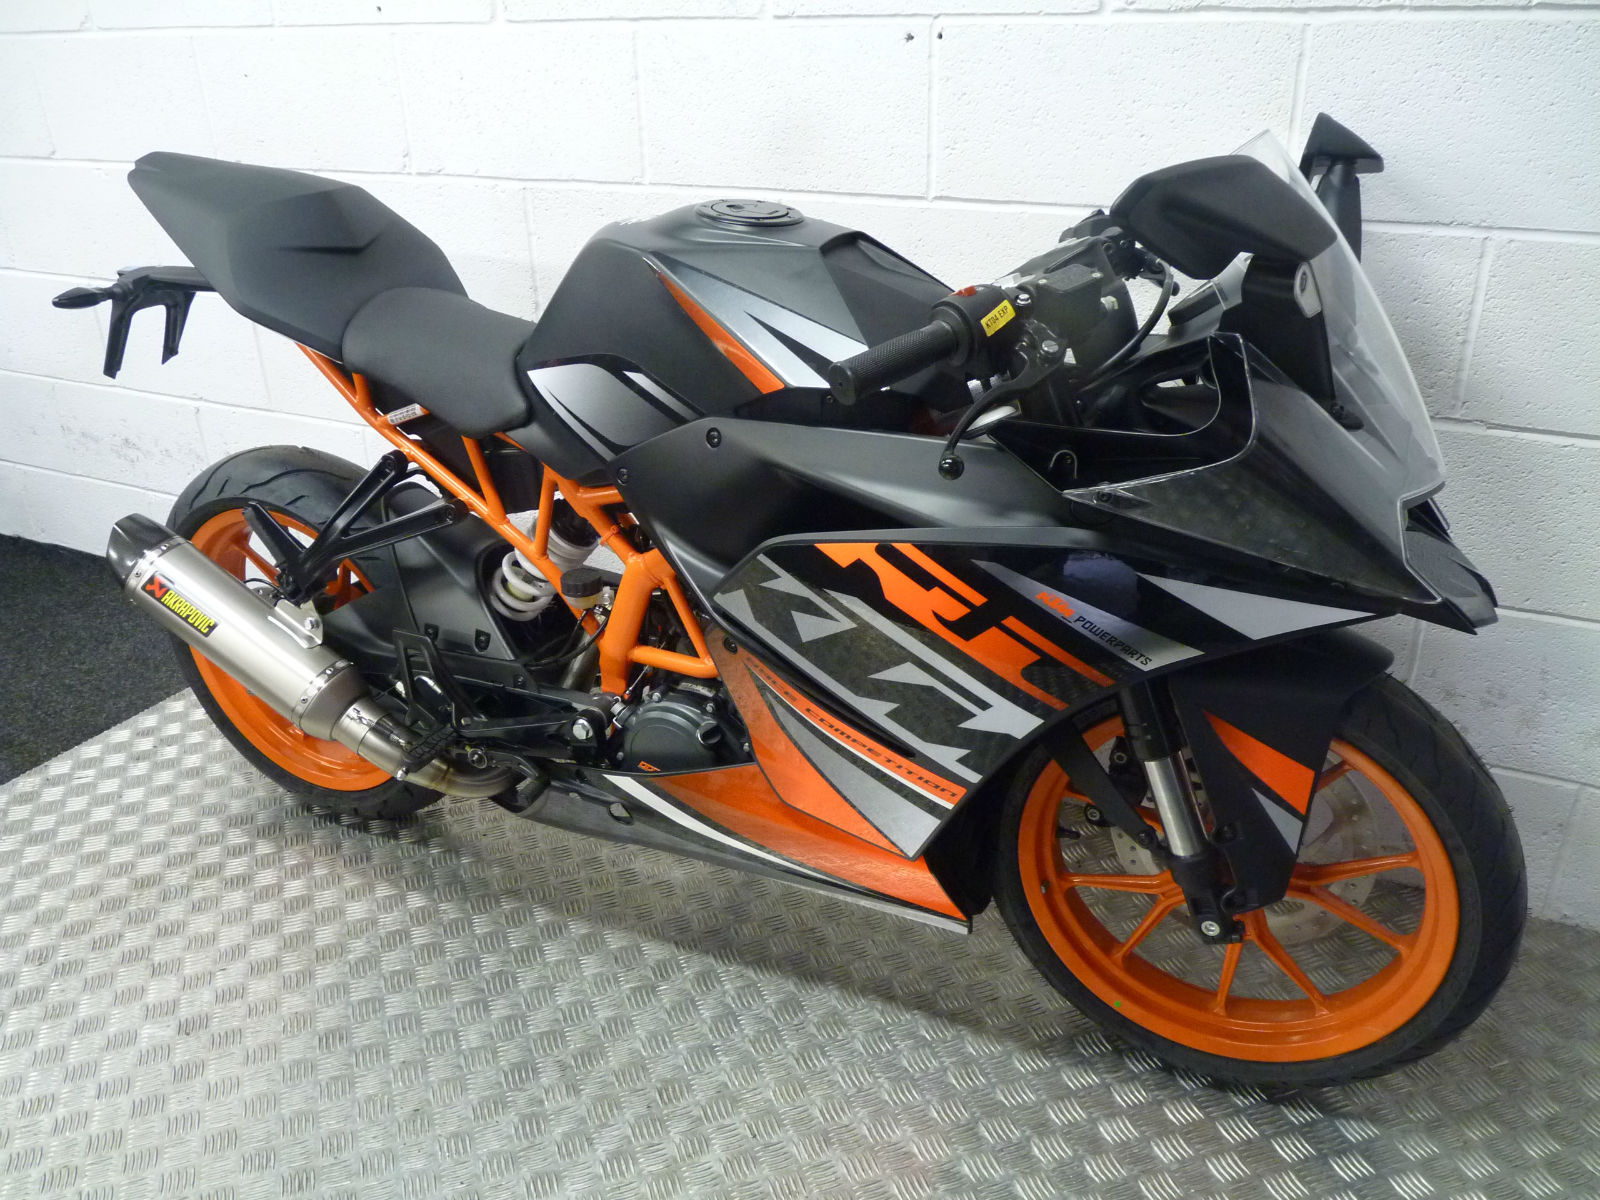 KTM RC 125 2015 SPORTS BIKE NOW WITH FREE AKRAPOVIC EXHAUST AT CRAIGS